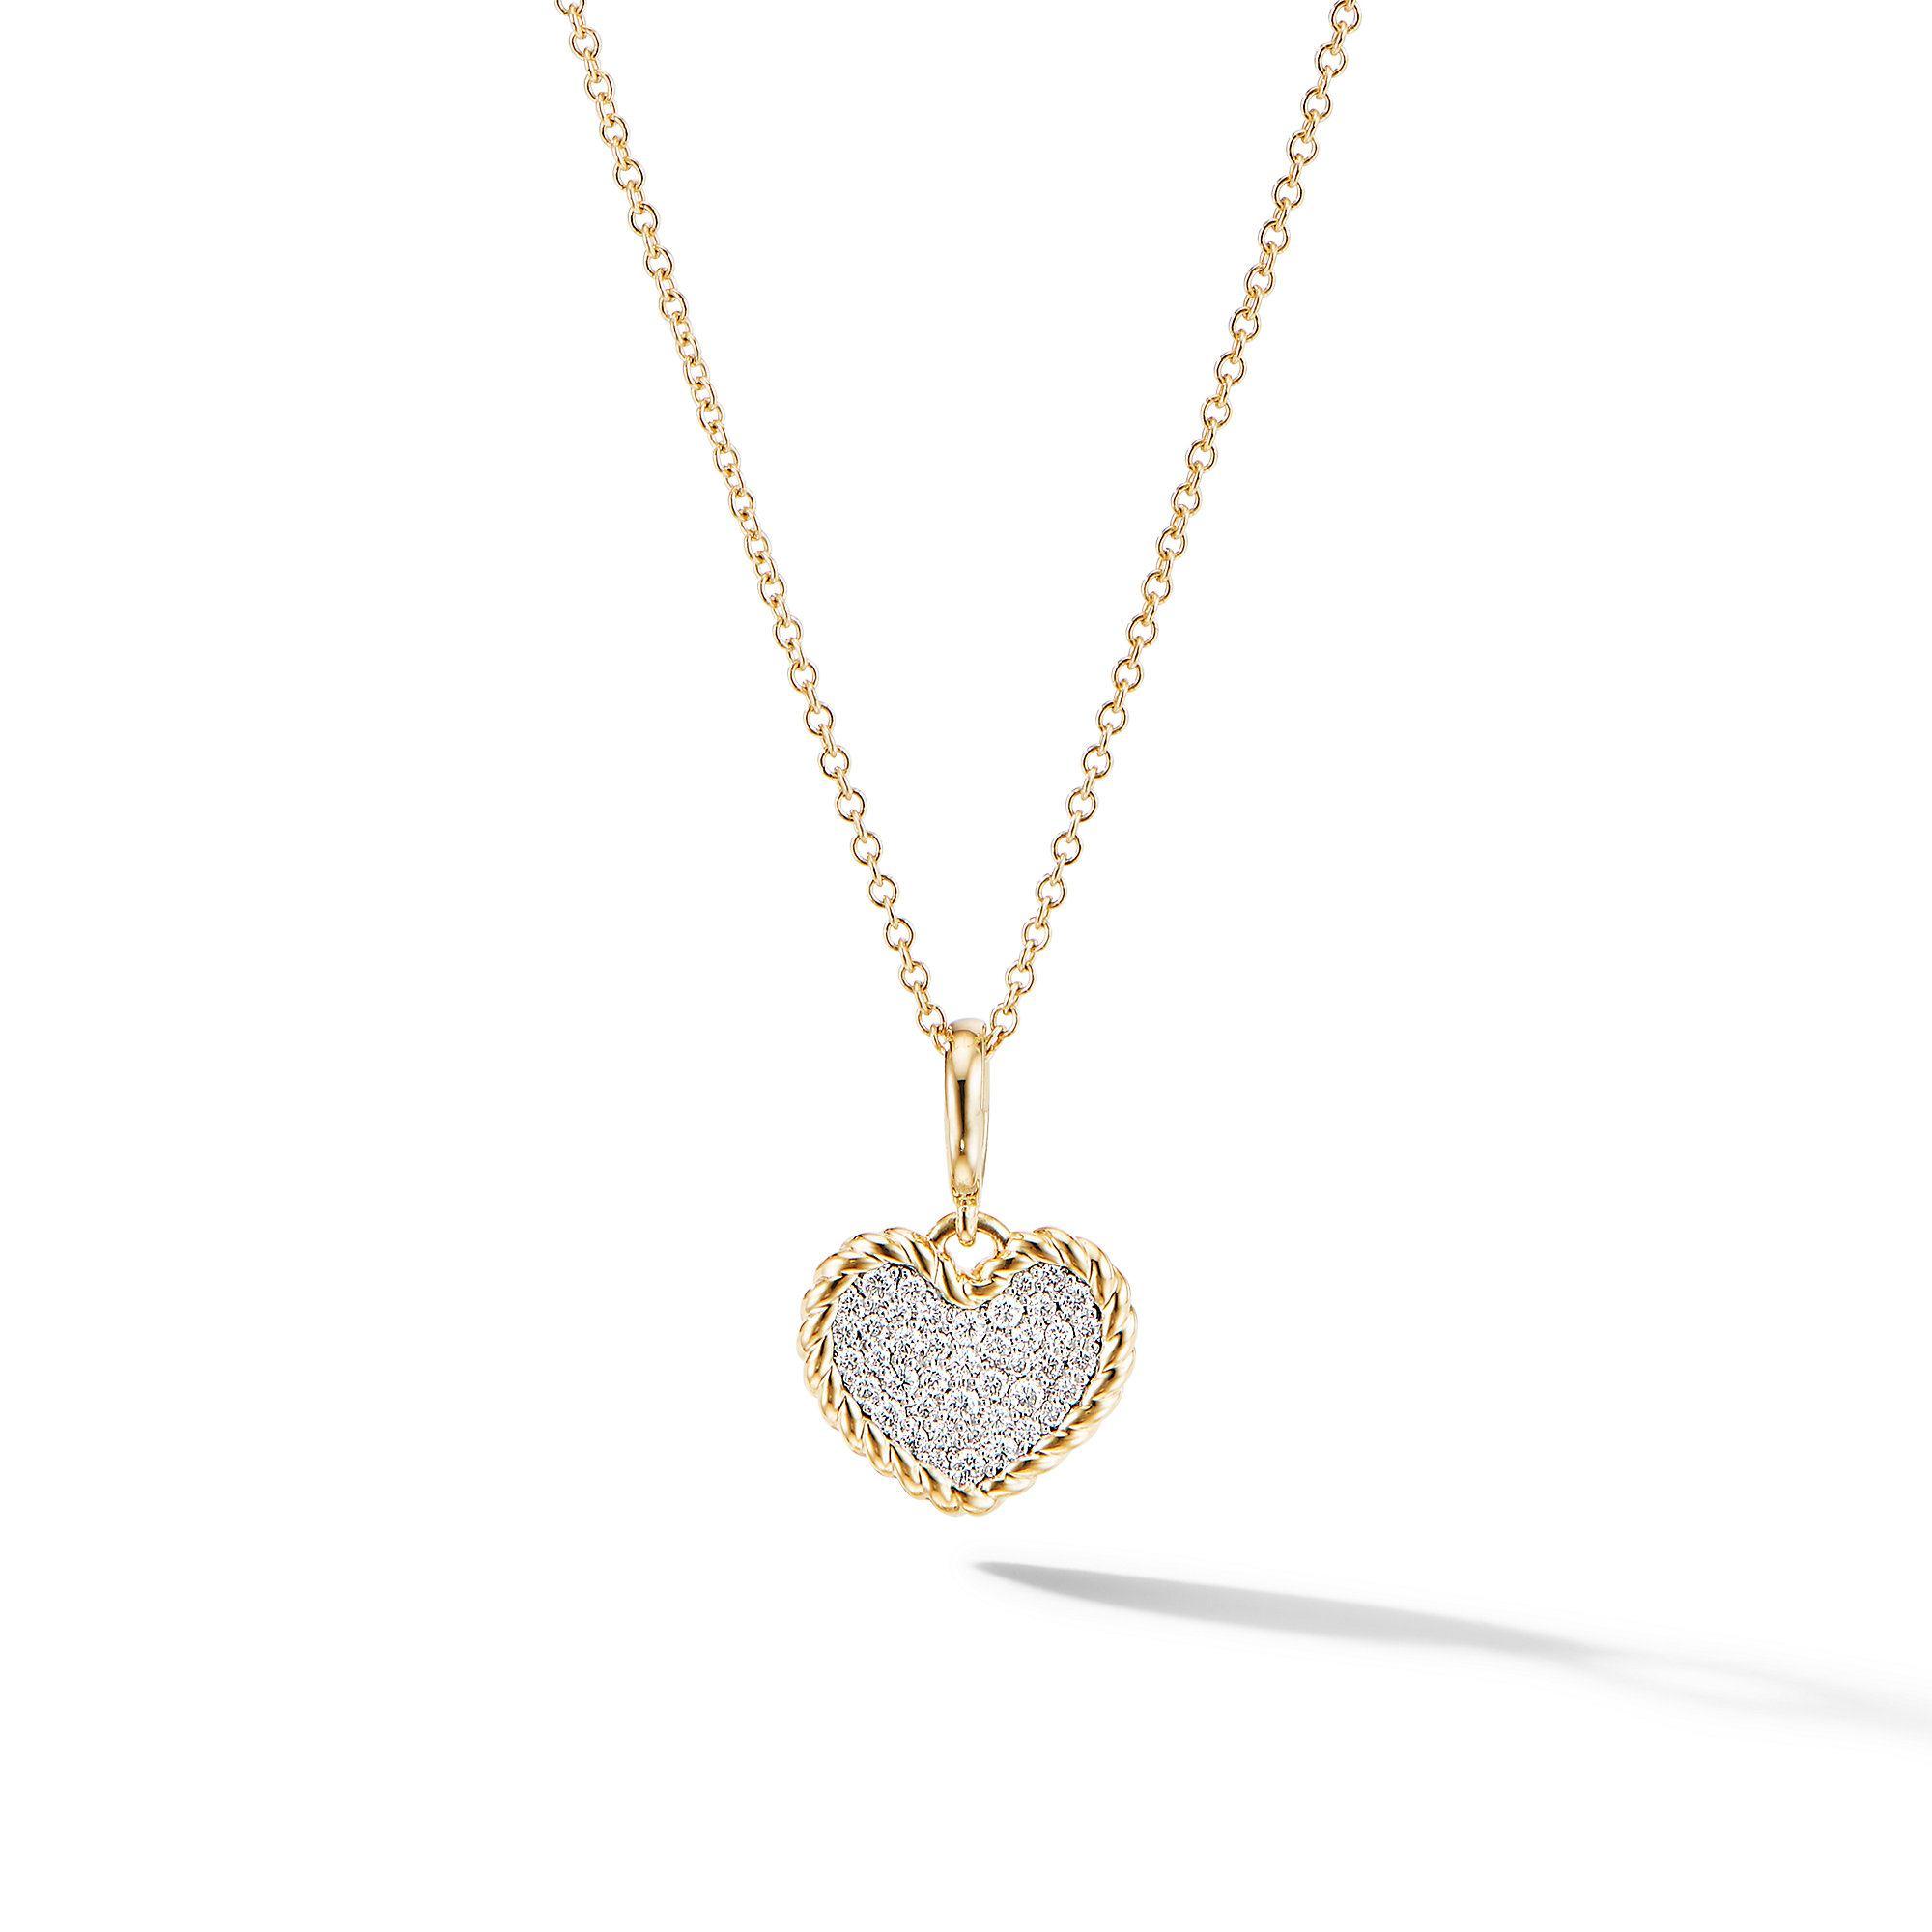 David Yurman Cable Collectibles Pave Plate Heart Charm Necklace in 18k Yellow Gold